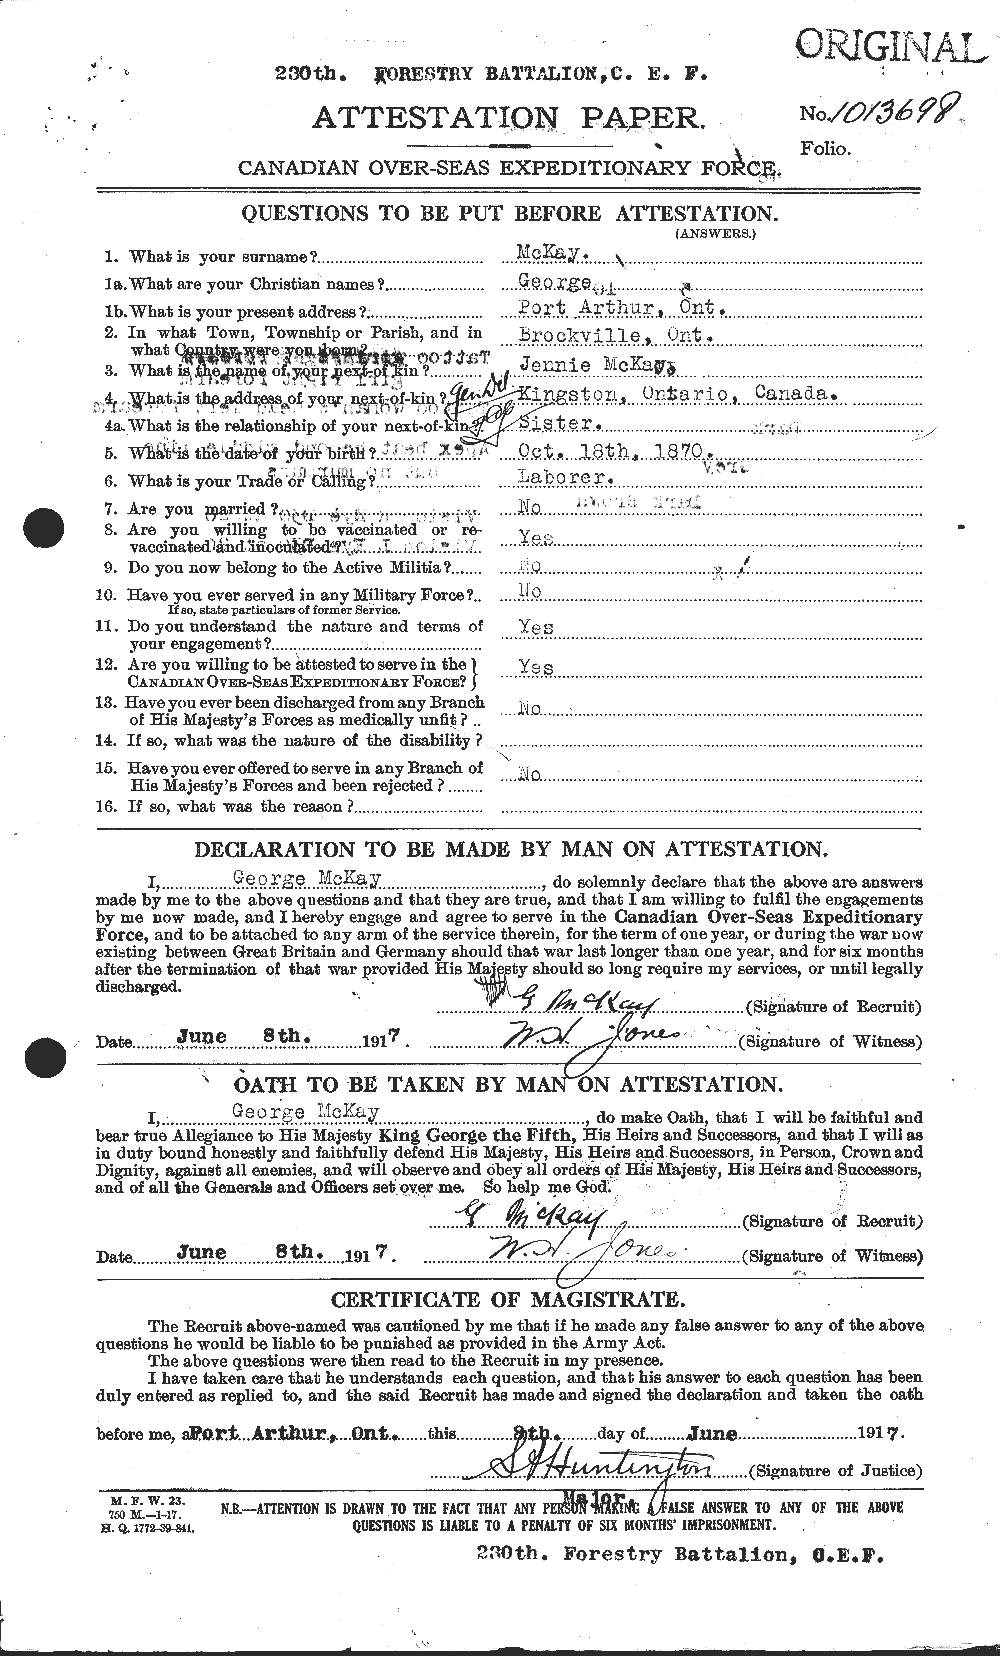 Personnel Records of the First World War - CEF 534647a